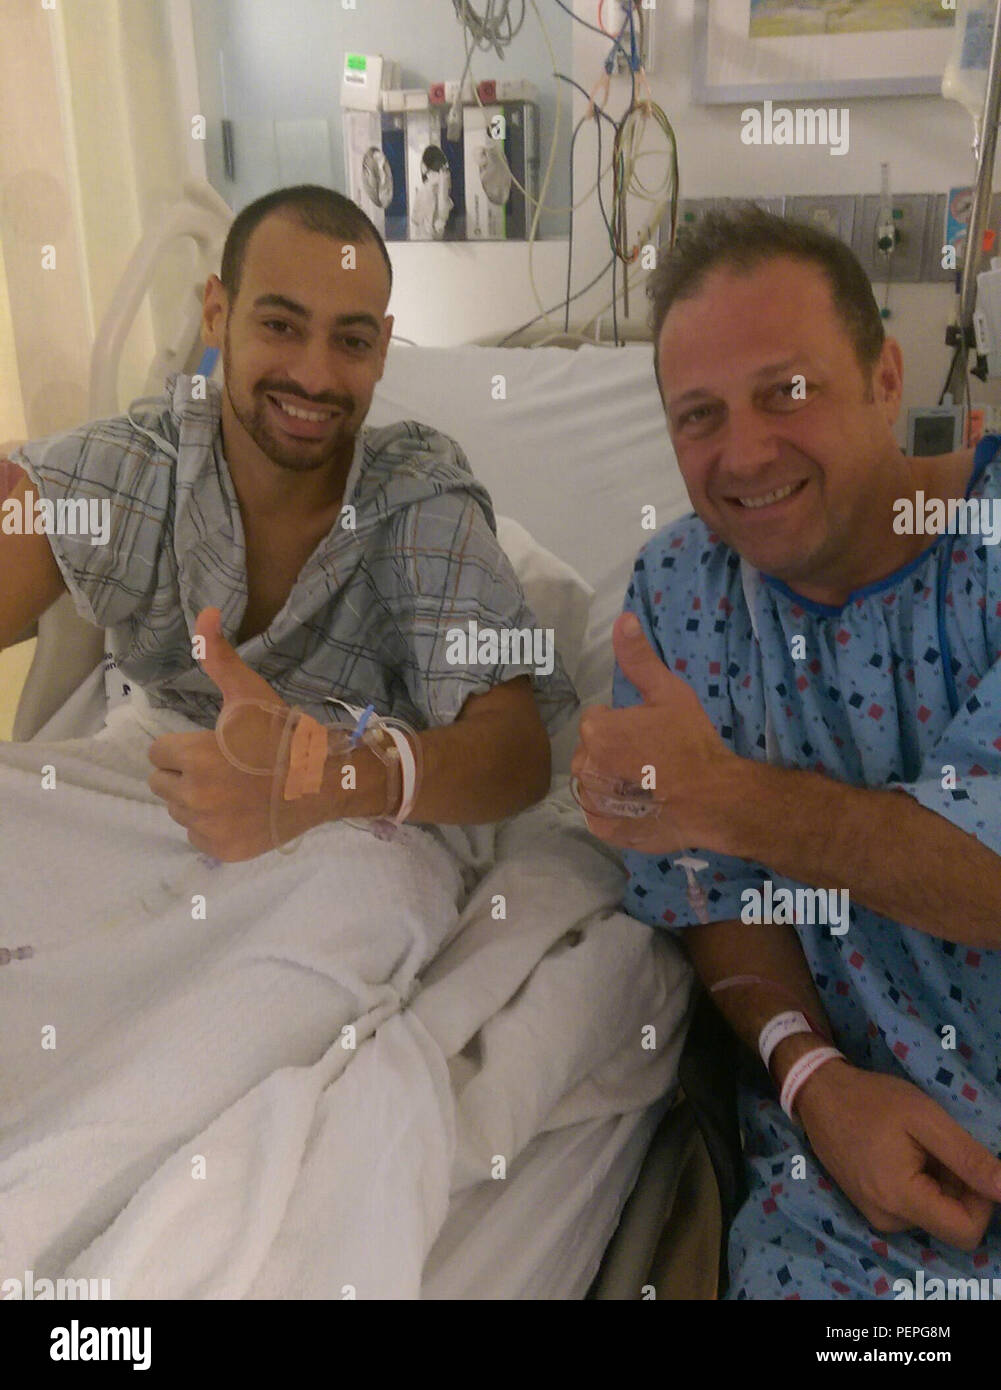 New York Air National Guard Staff Sgt. Daniel Cola (left) and Master Sgt. Henry Windels (right) of the 105th Airlift Wing, give thumbs-up before surgery Oct. 6, 2015, during which  Windels donated one his kidneys to Cola, saving Cola from a difficult, limited life with continual kidney-dialysis treatments. (Photo Courtesy Aly Cola) Stock Photo